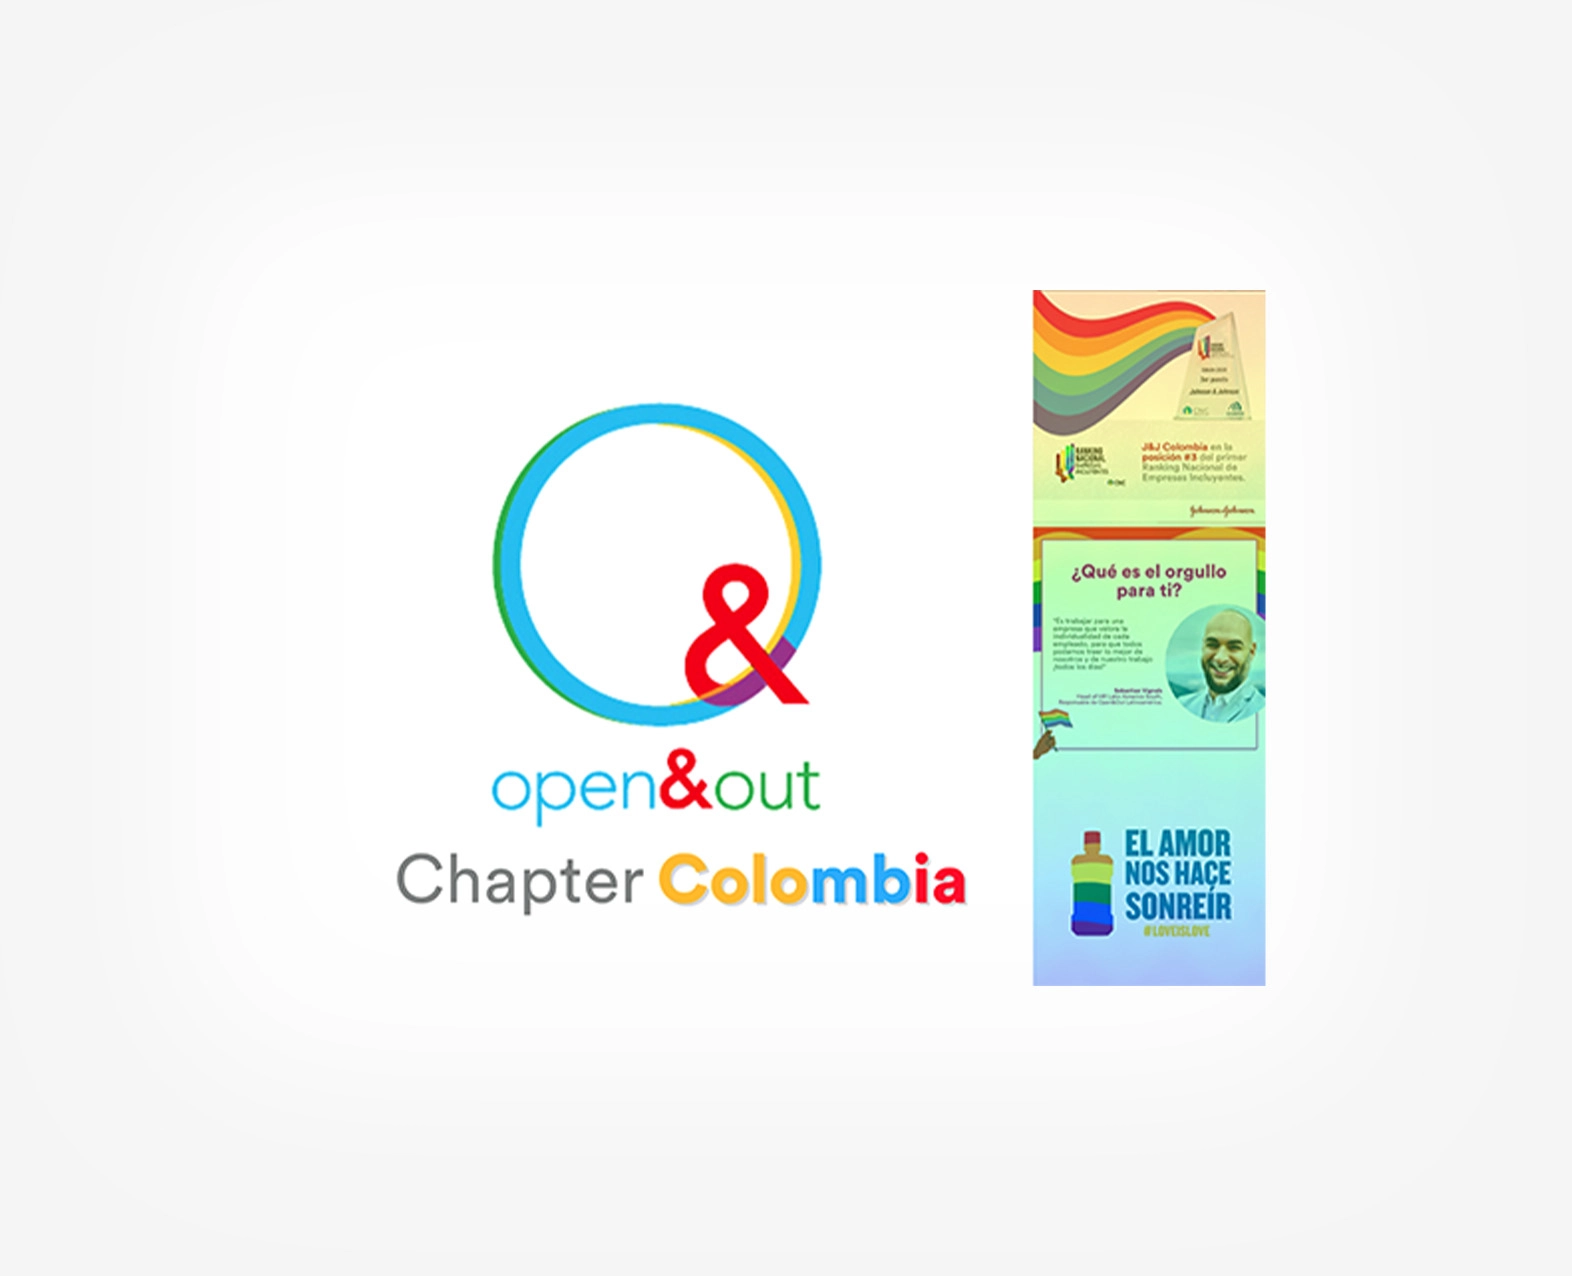 Open&Out Chapter Colombia graphic with colorful designs. (photo)